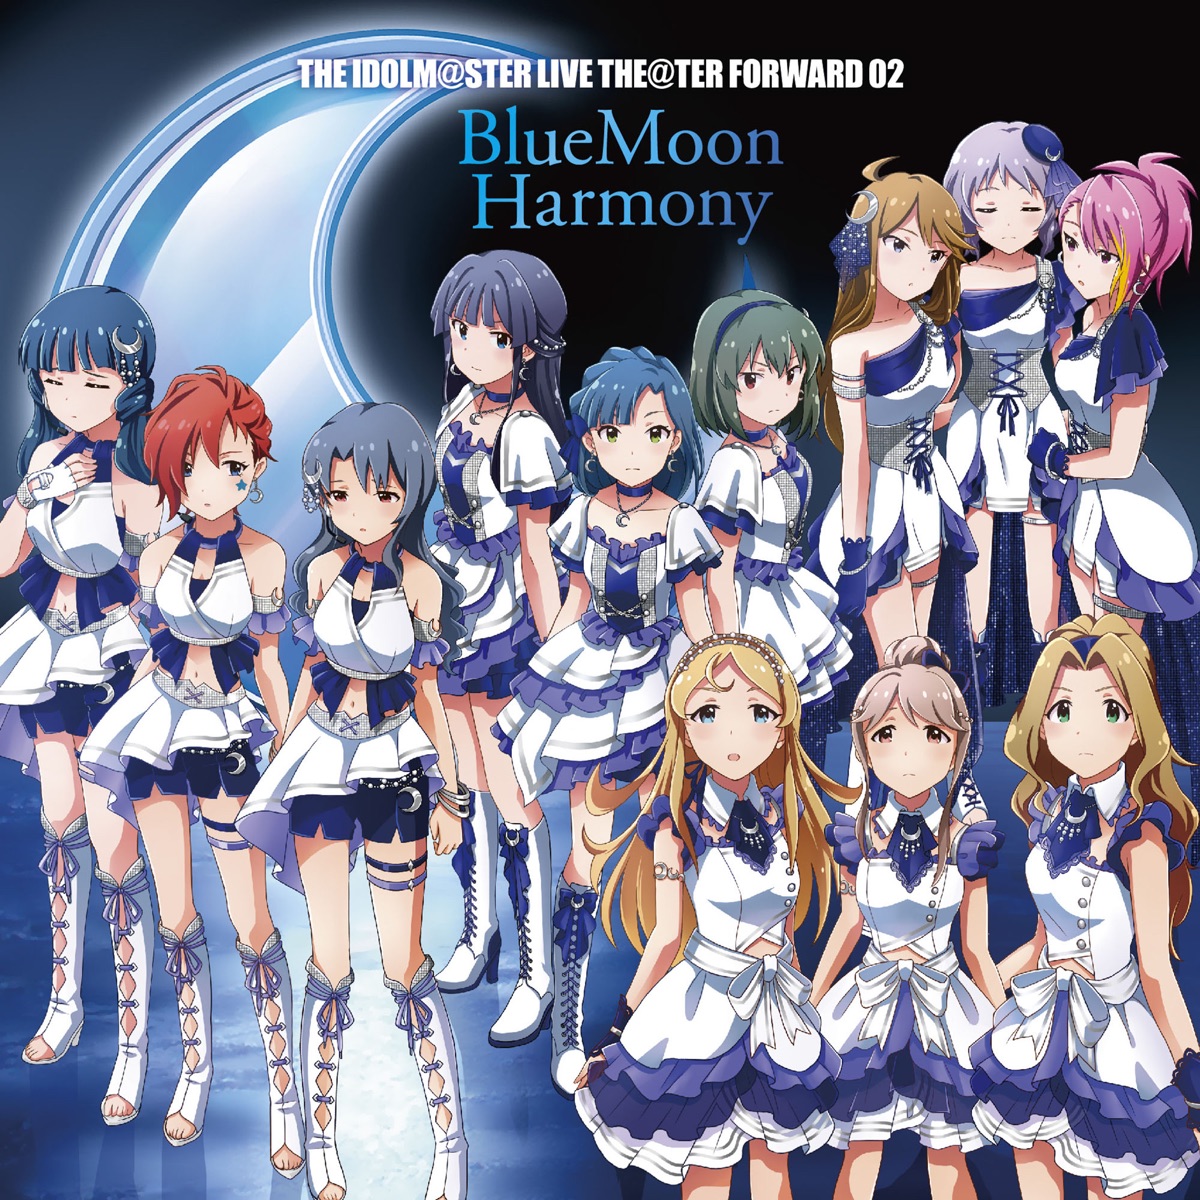 THE IDOLM@STER LIVE THE@TER FORWARD 02 BlueMoon Harmony - EP by